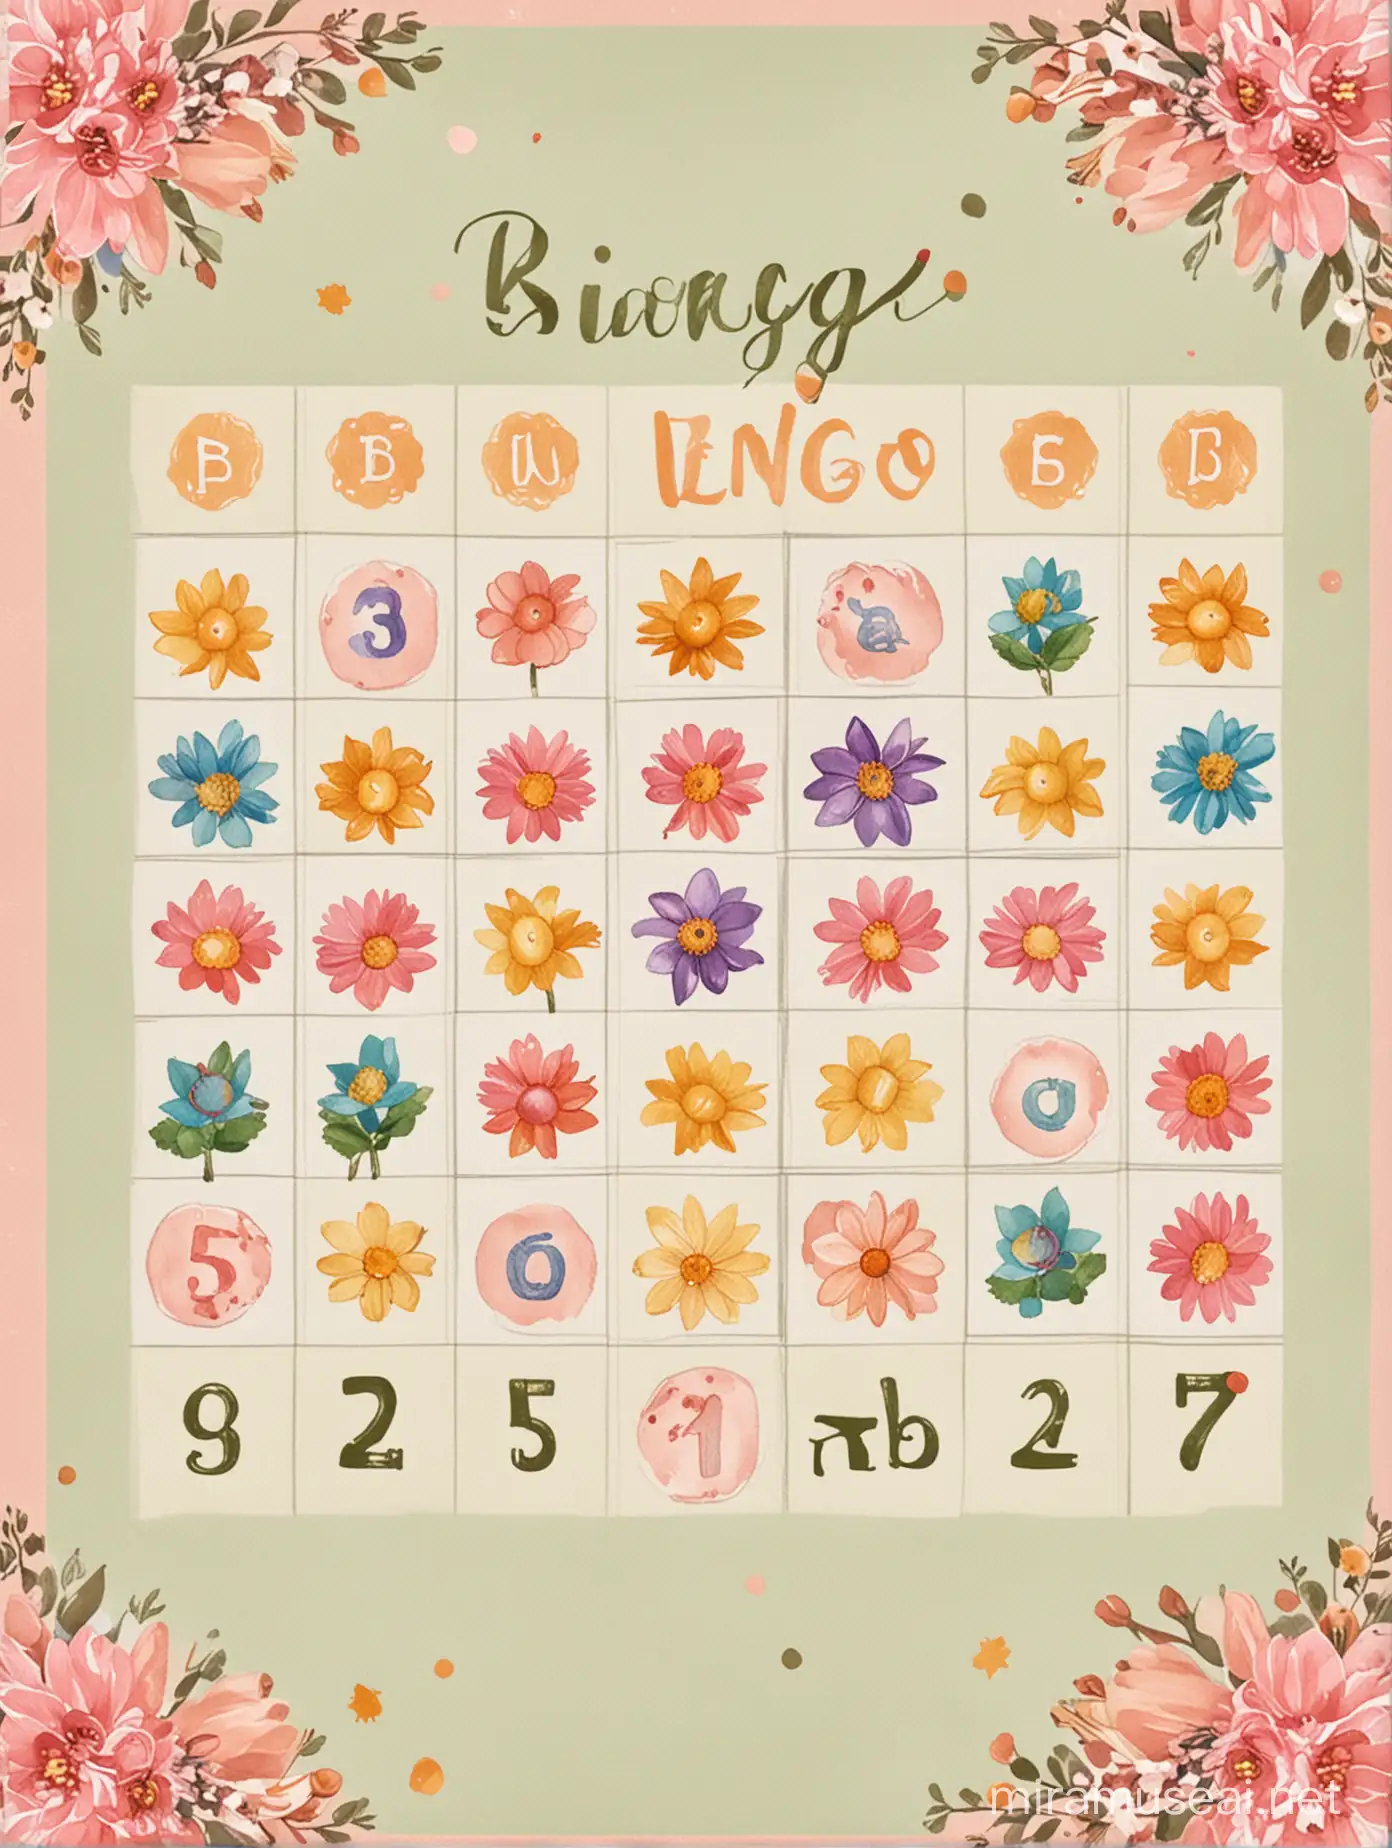 create a baby bingo game with the baby in bloom theme
